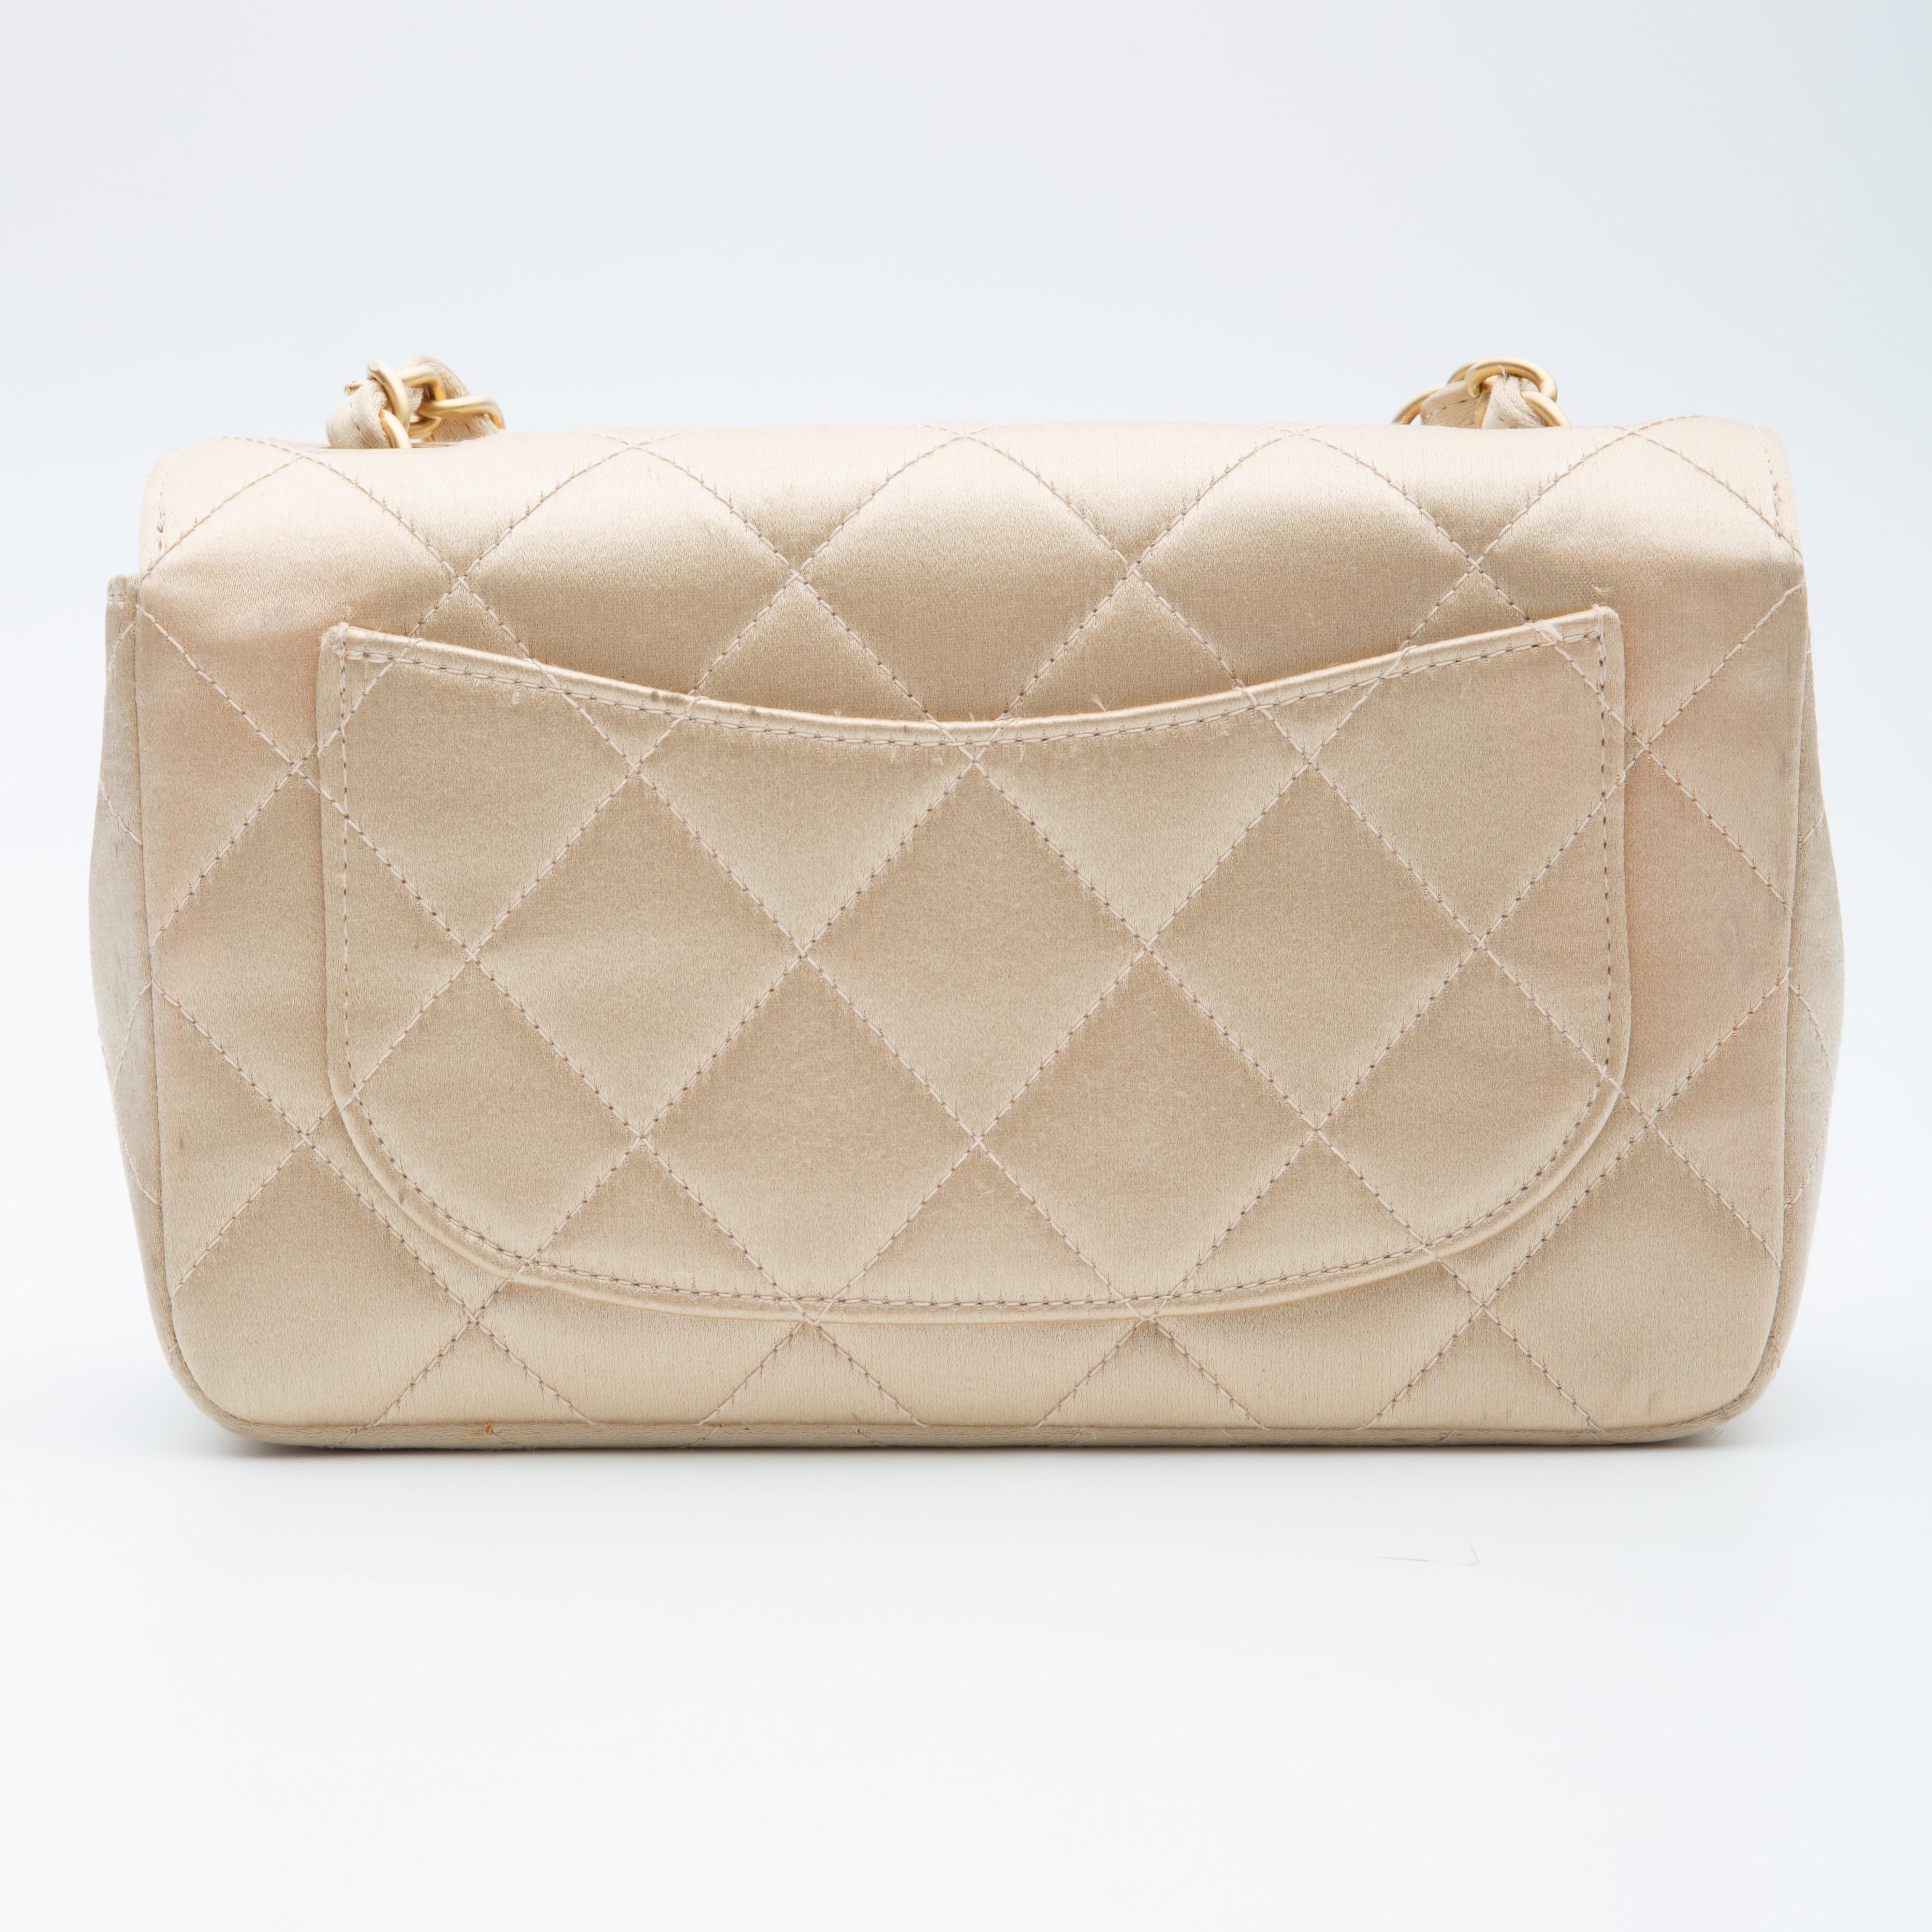 This rectangular classic mini flap bag is made with satin in light gold. The bag features two top holes for the shoulder straps (verse traditional four holes), a gold tone chain interlaced with leather shoulder strap, interlocking CC twist lock